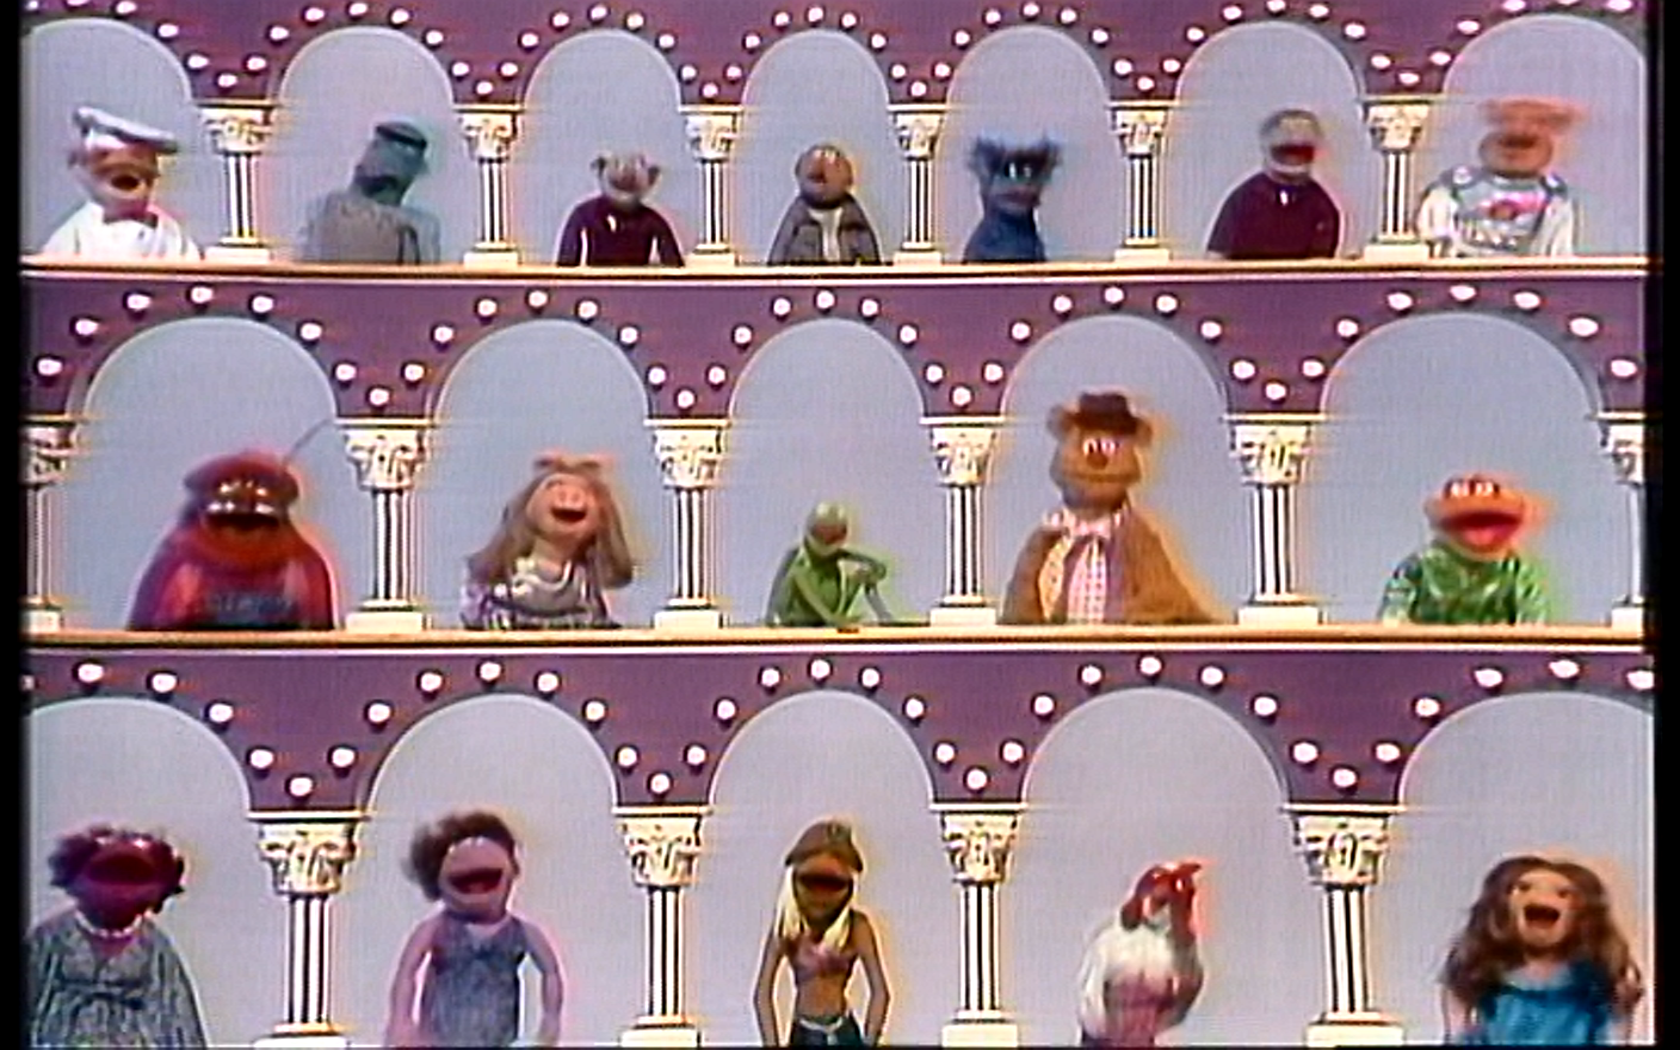 muppet show arches